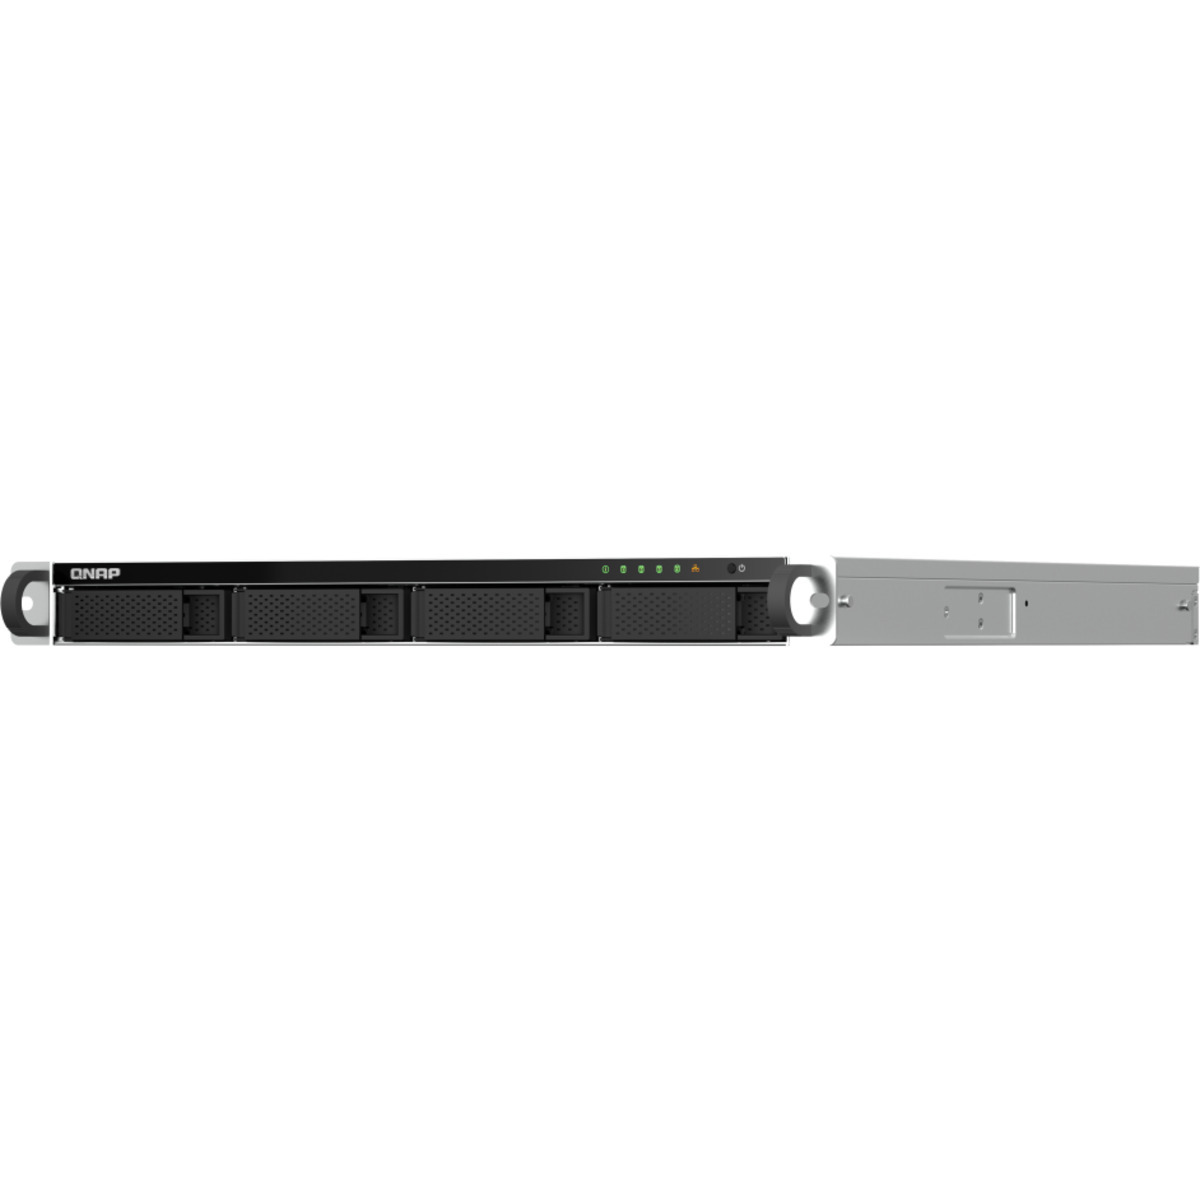 QNAP TS-464U-RP 18tb 4-Bay RackMount Multimedia / Power User / Business NAS - Network Attached Storage Device 3x6tb Seagate BarraCuda ST6000DM003 3.5 5400rpm SATA 6Gb/s HDD CONSUMER Class Drives Installed - Burn-In Tested TS-464U-RP